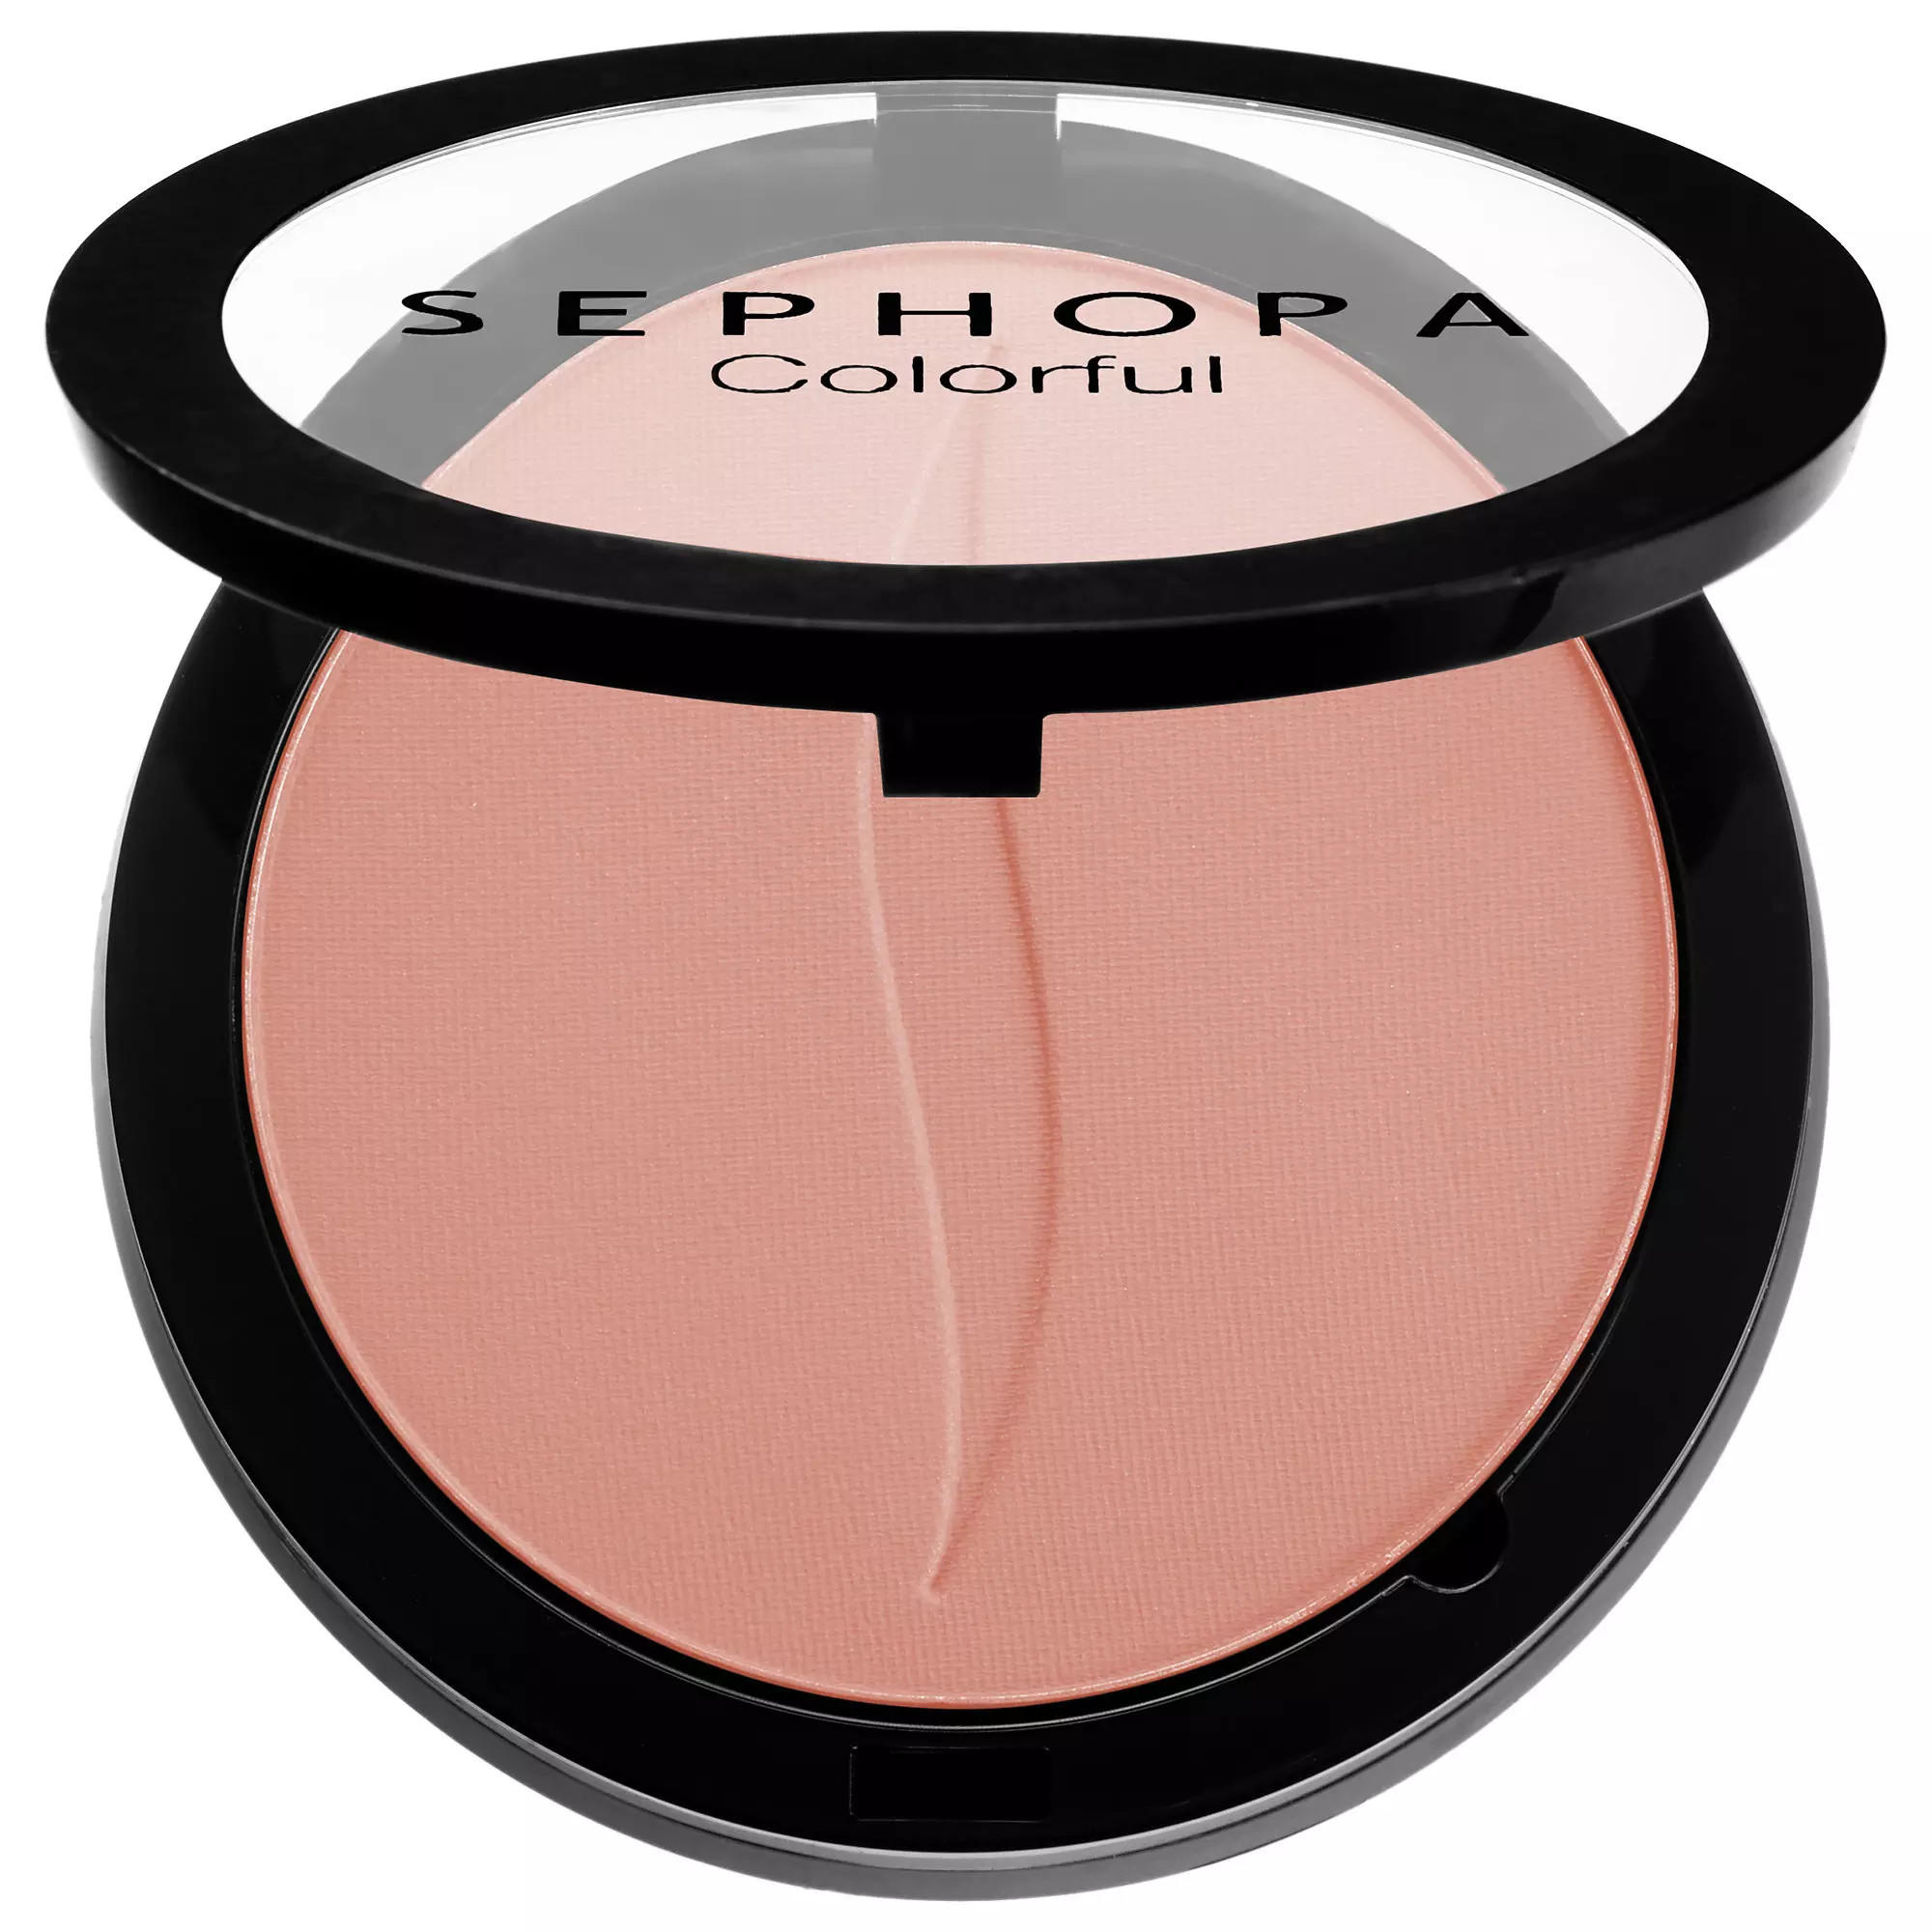 Sephora Colorful Face Powders Blush Love At First Sight No. 04